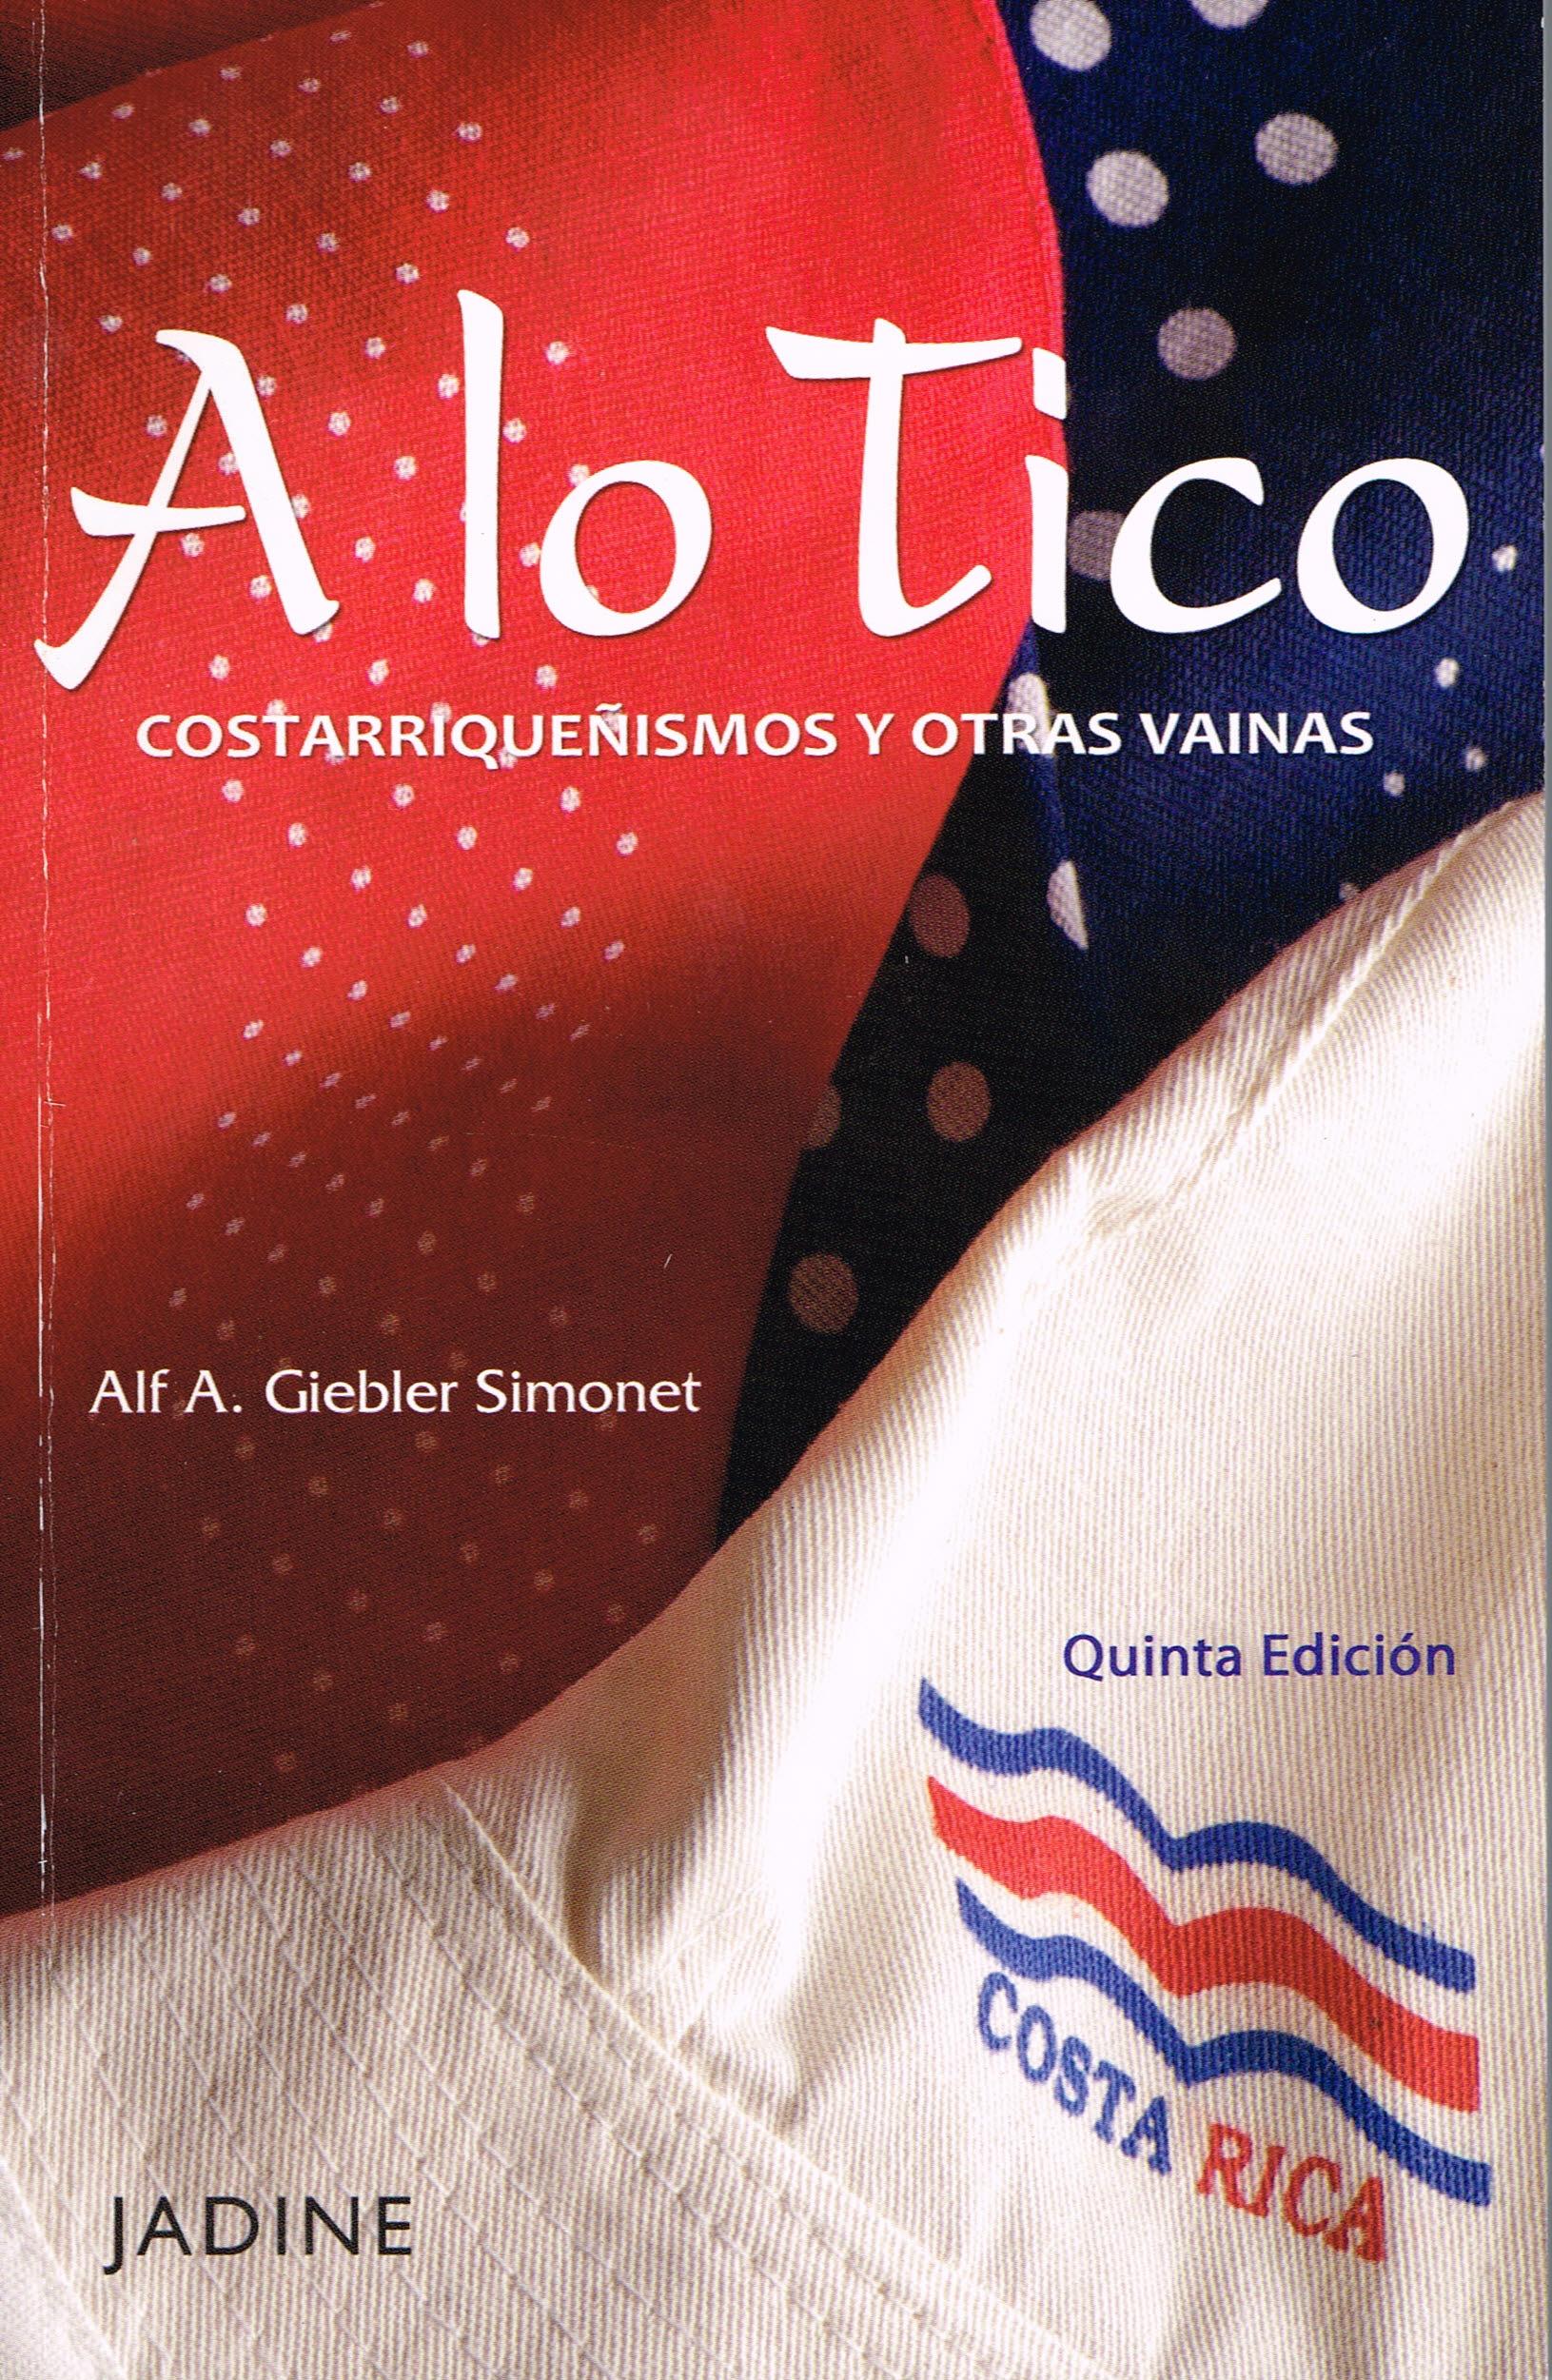 Buy Alf Gieblers book: A lo Tico and learn the Tico ways.